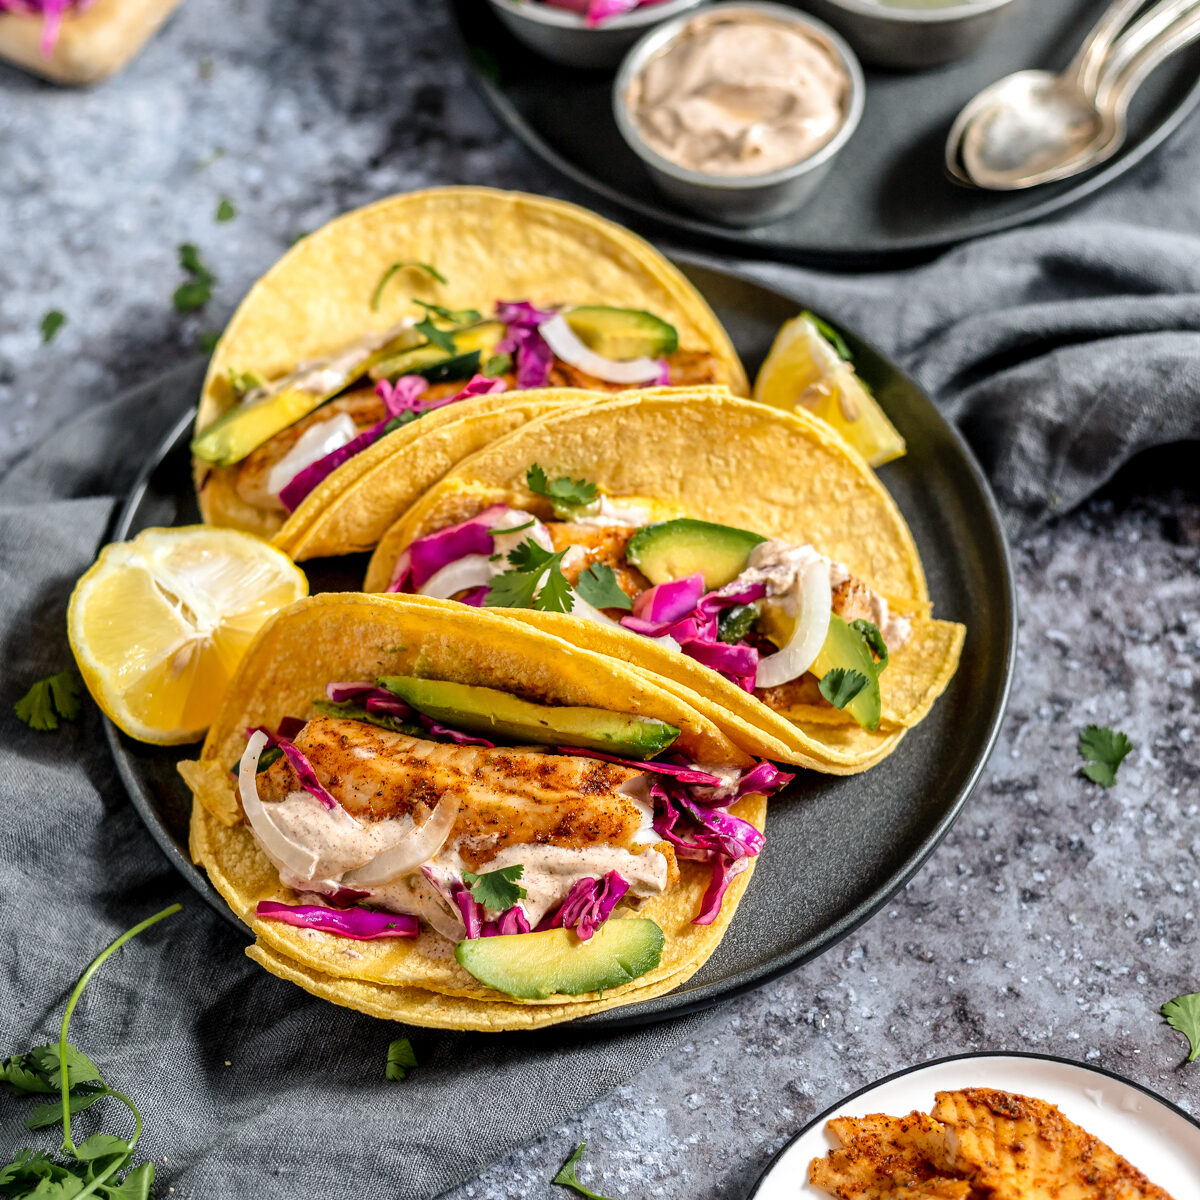 Three yellow corn tortillas folded in half and stuffed with orange fish, green avocado, purple cabbage and creamy sauce on a grey plate set on a grey countertop.